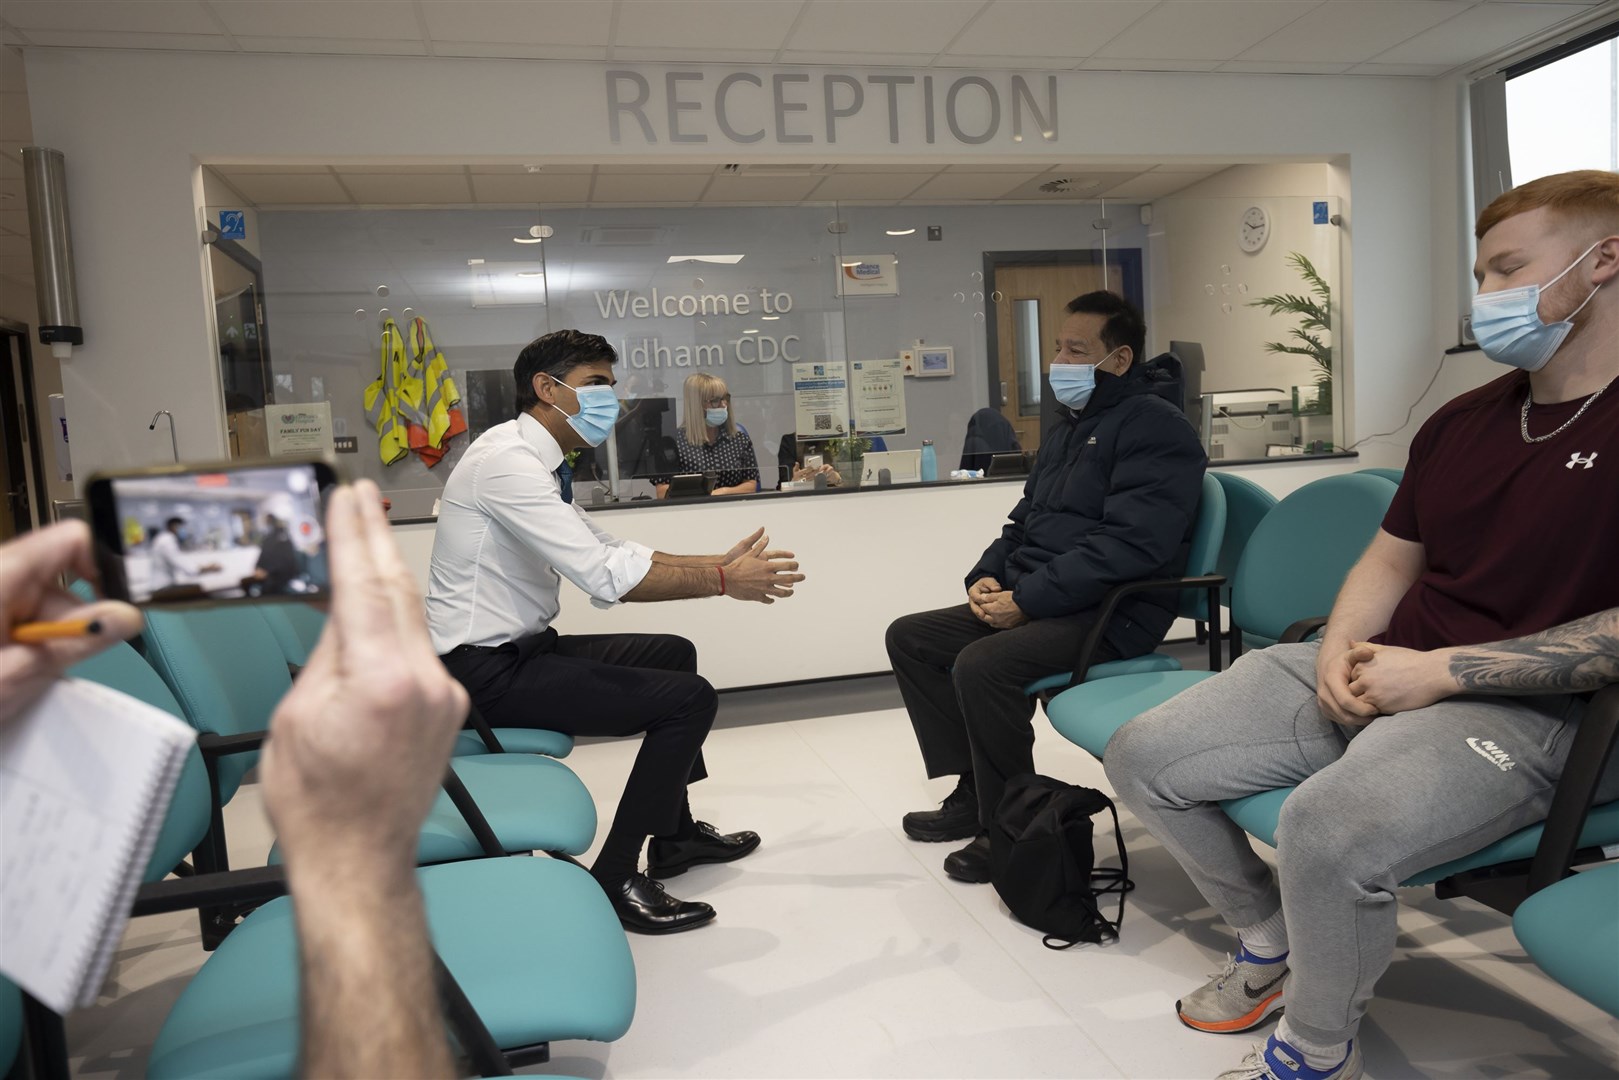 Prime Minister Rishi Sunak talks with a patient, Riaz Ahmad, during a visit to Oldham Community Diagnostic Centre in Greater Manchester (James Glossop/The Times/PA)